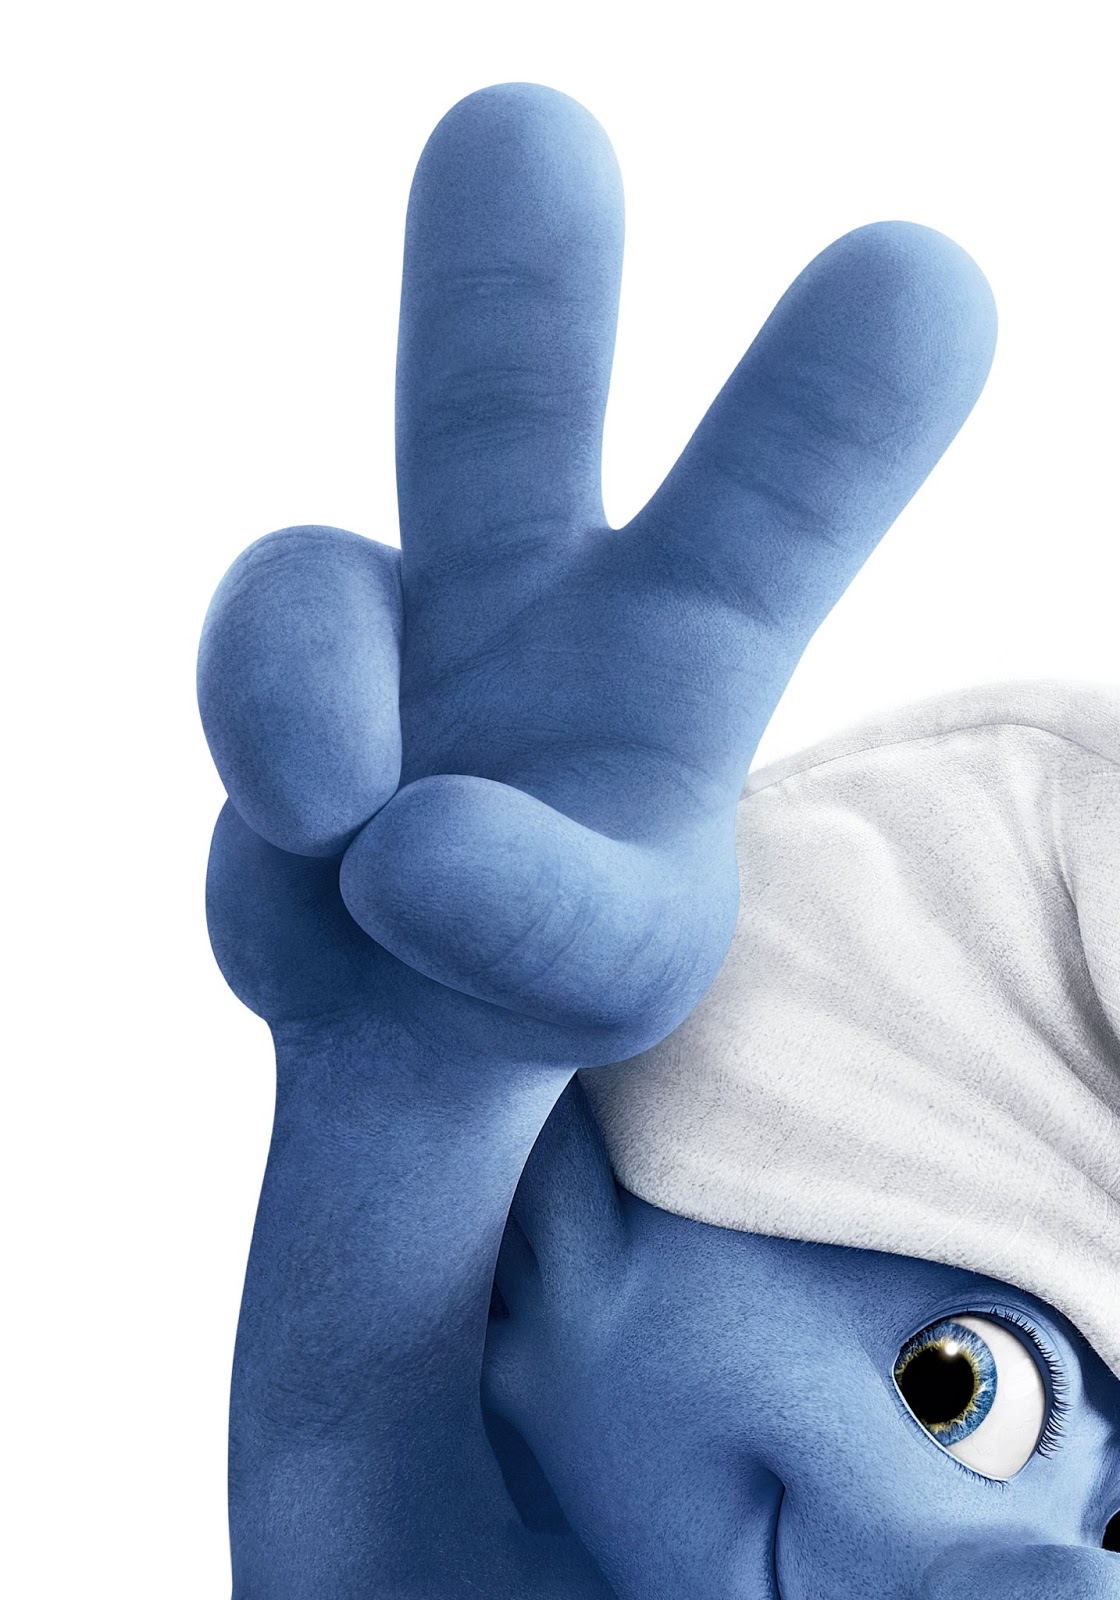 Textless Movies: The Smurfs 2 TEXTLESS | Teaser Poster